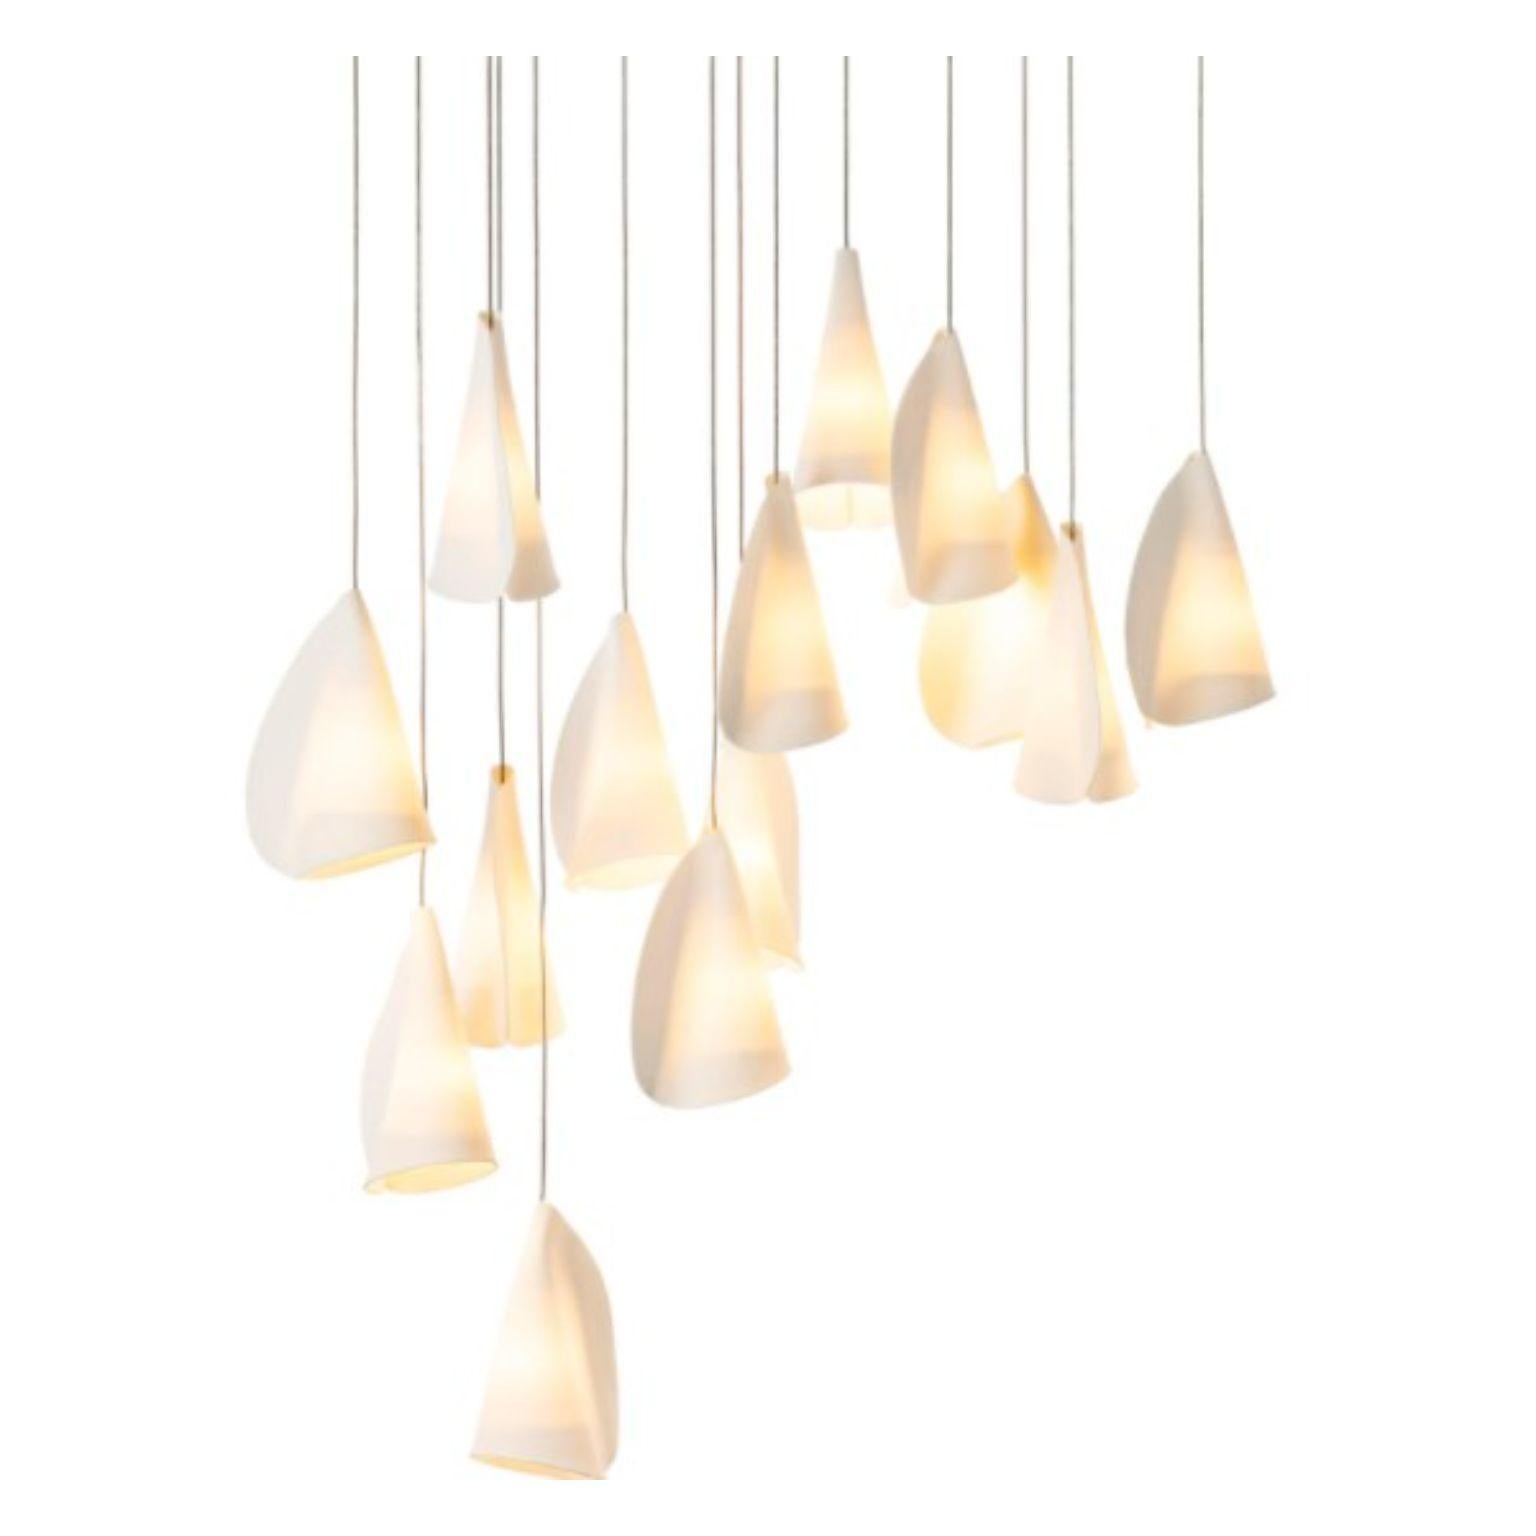 21.14 Pendant by Bocci
Dimensions: D 50.8 x H 300 cm
Materials: white powder, coated square canopy
Weight:17.7 kg
Also Available in different dimensions.

All our lamps can be wired according to each country. If sold to the USA it will be